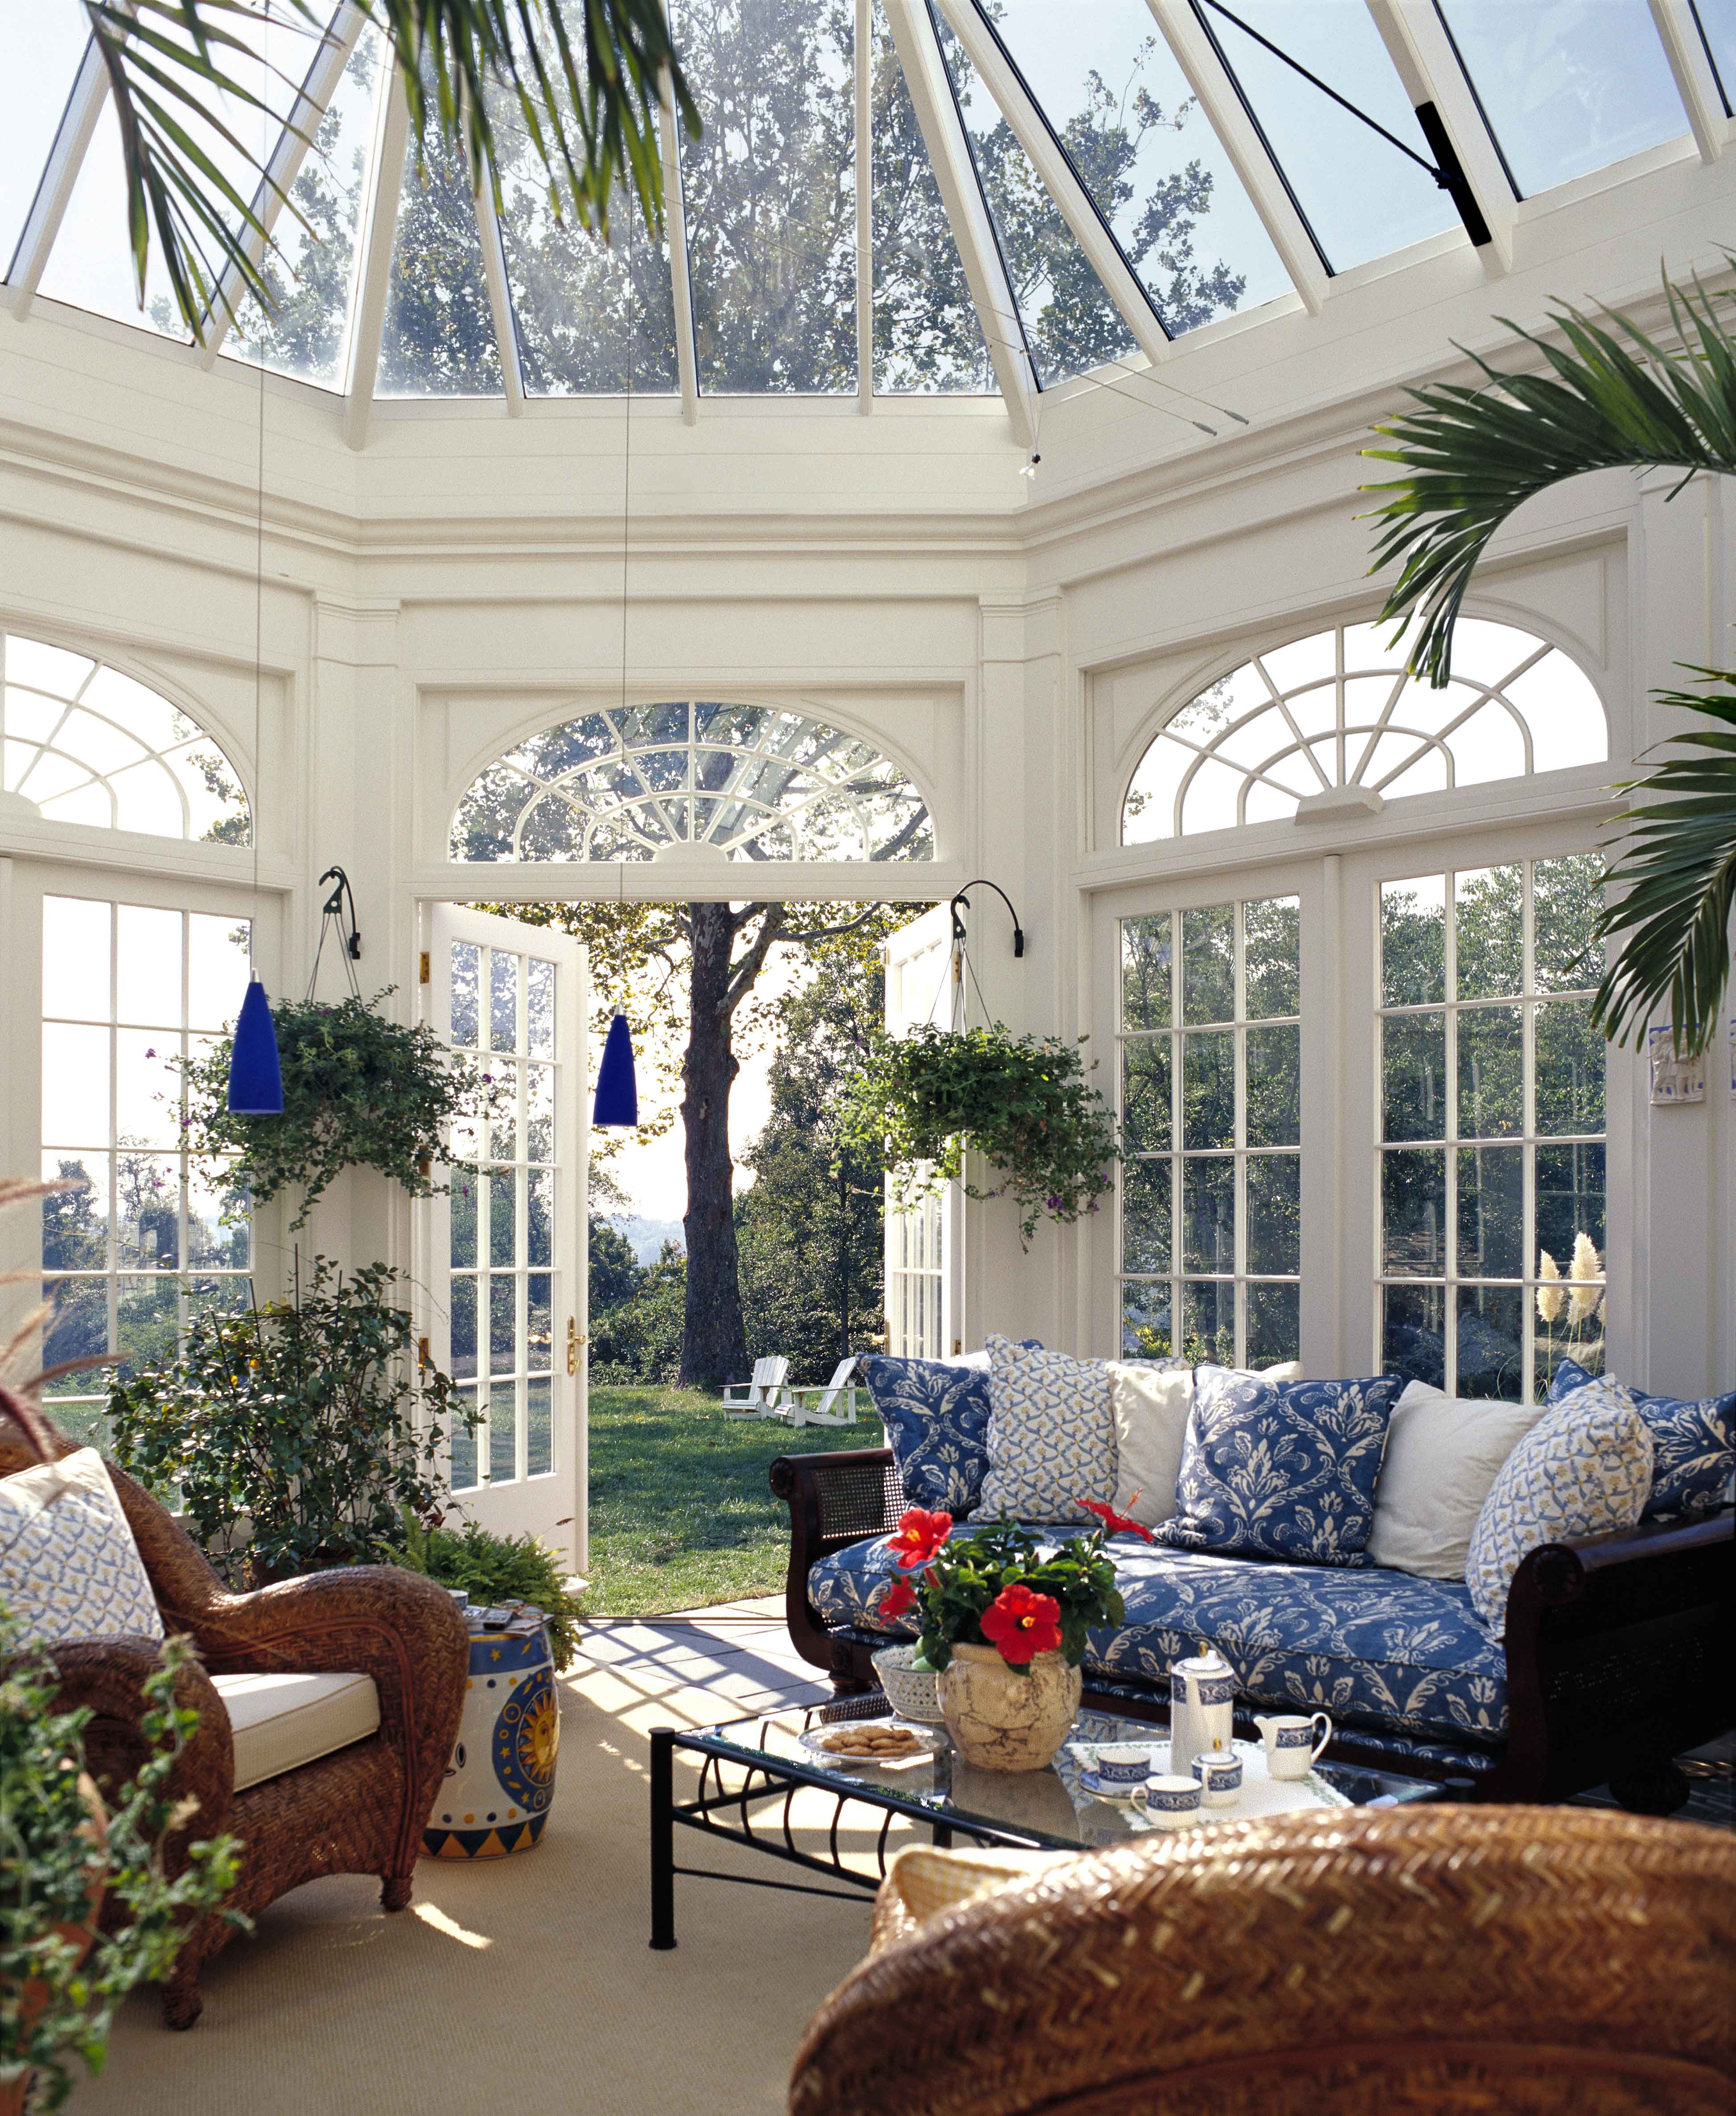 residential conservatory | interior skylight view